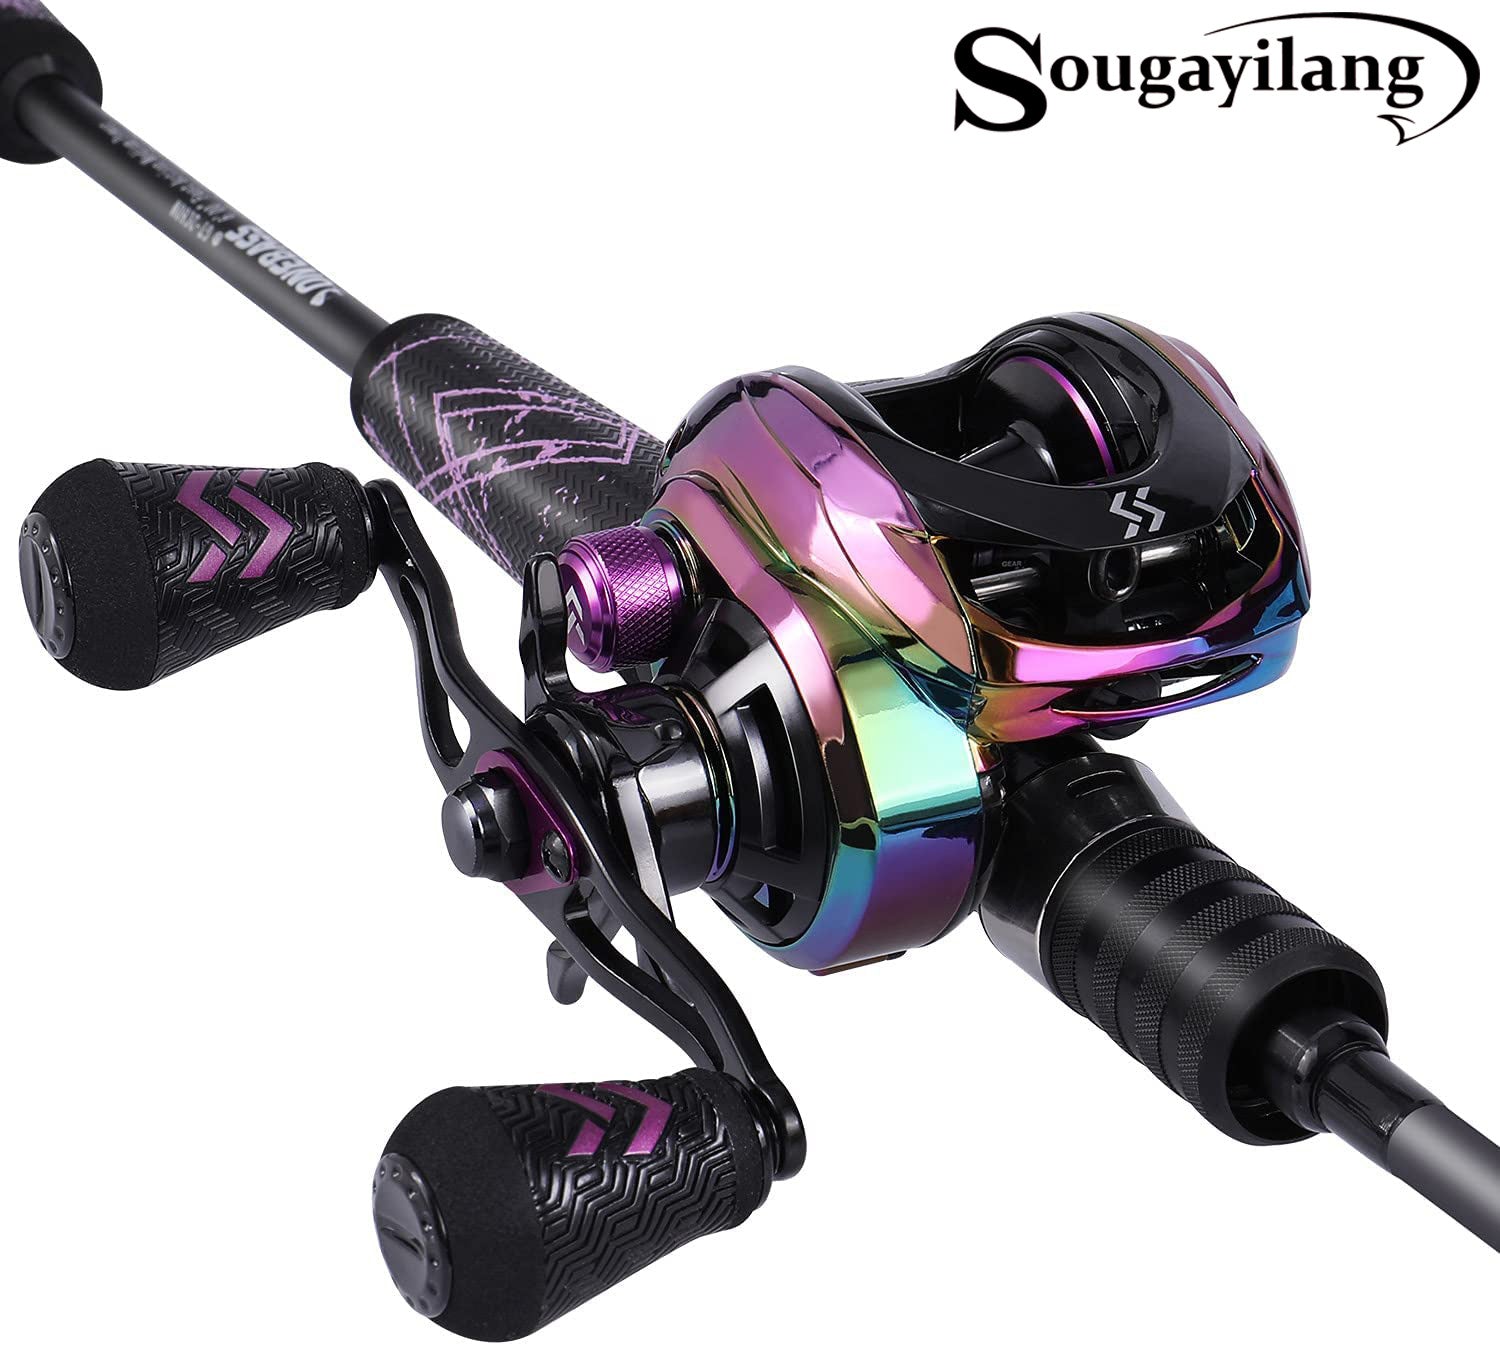 Buy BNTTEAM Mini Baitcasting Reel and Rod Combos Hard High Carbon